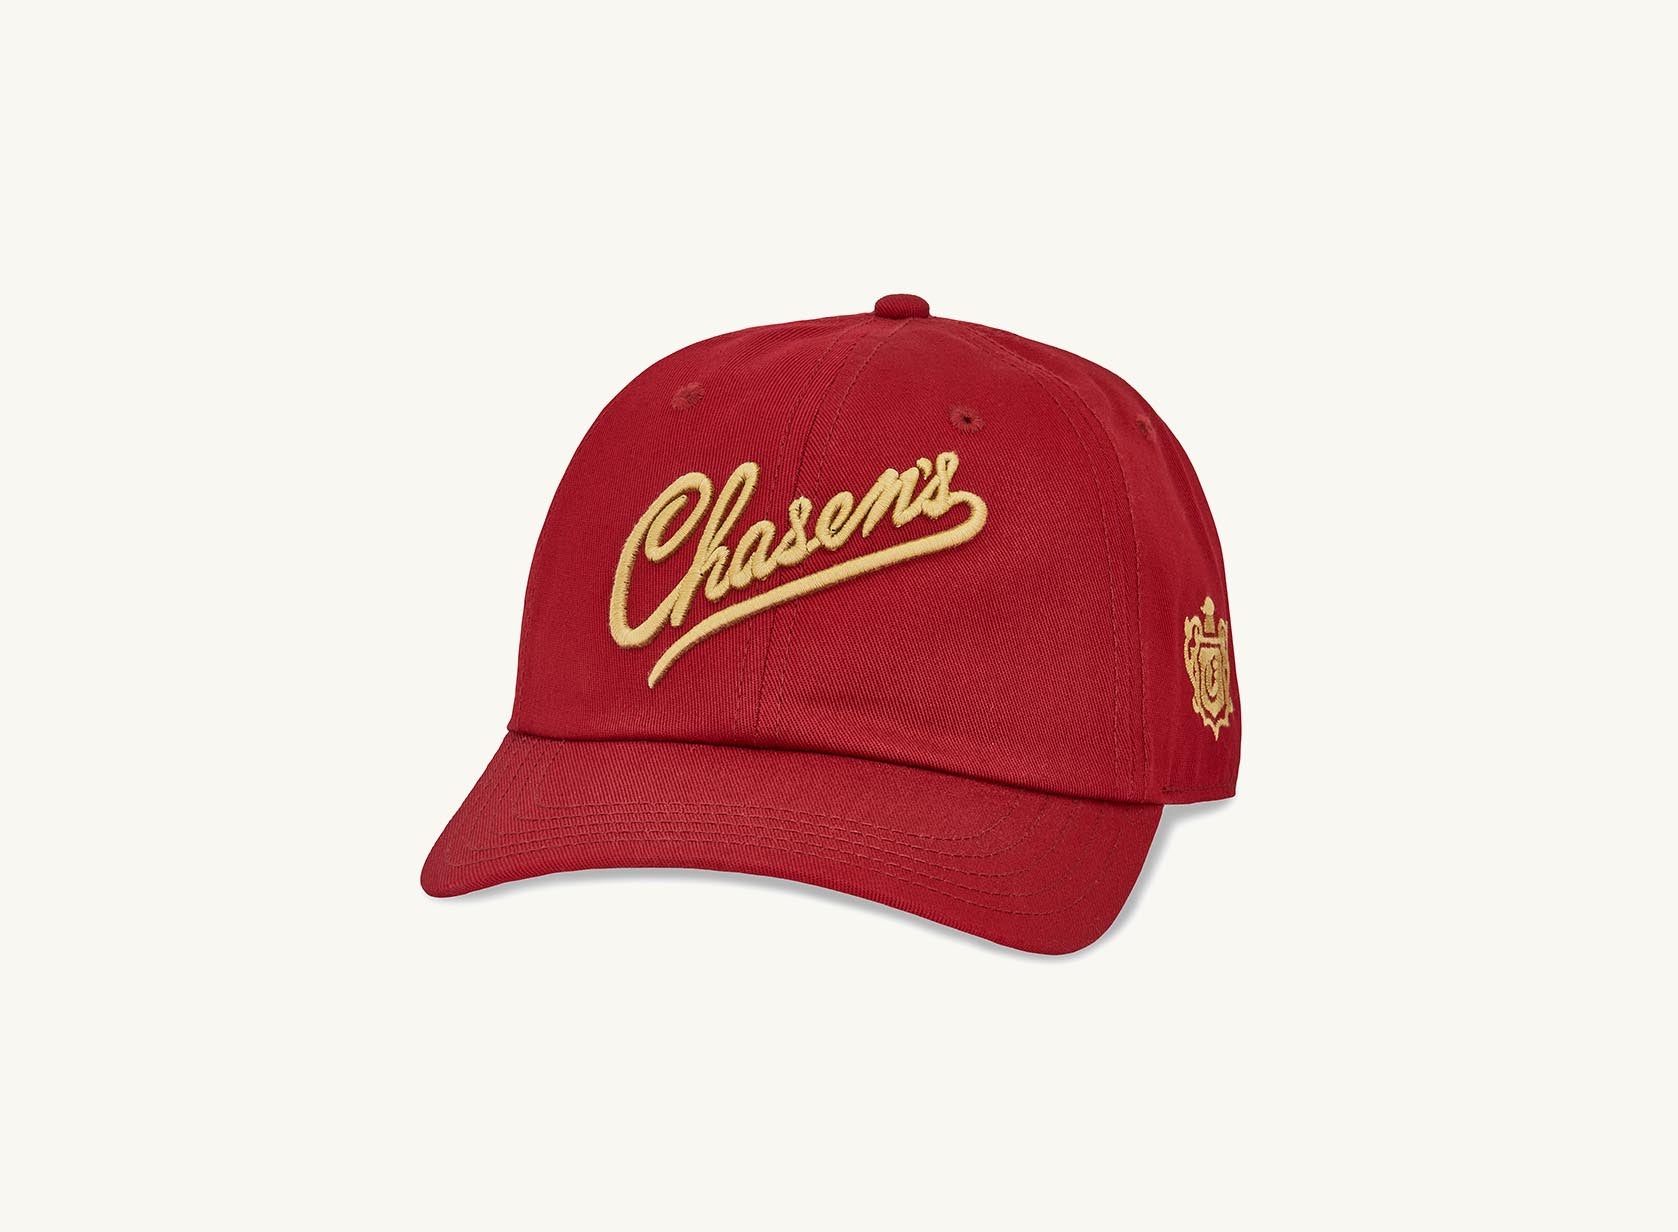 red chasens hat